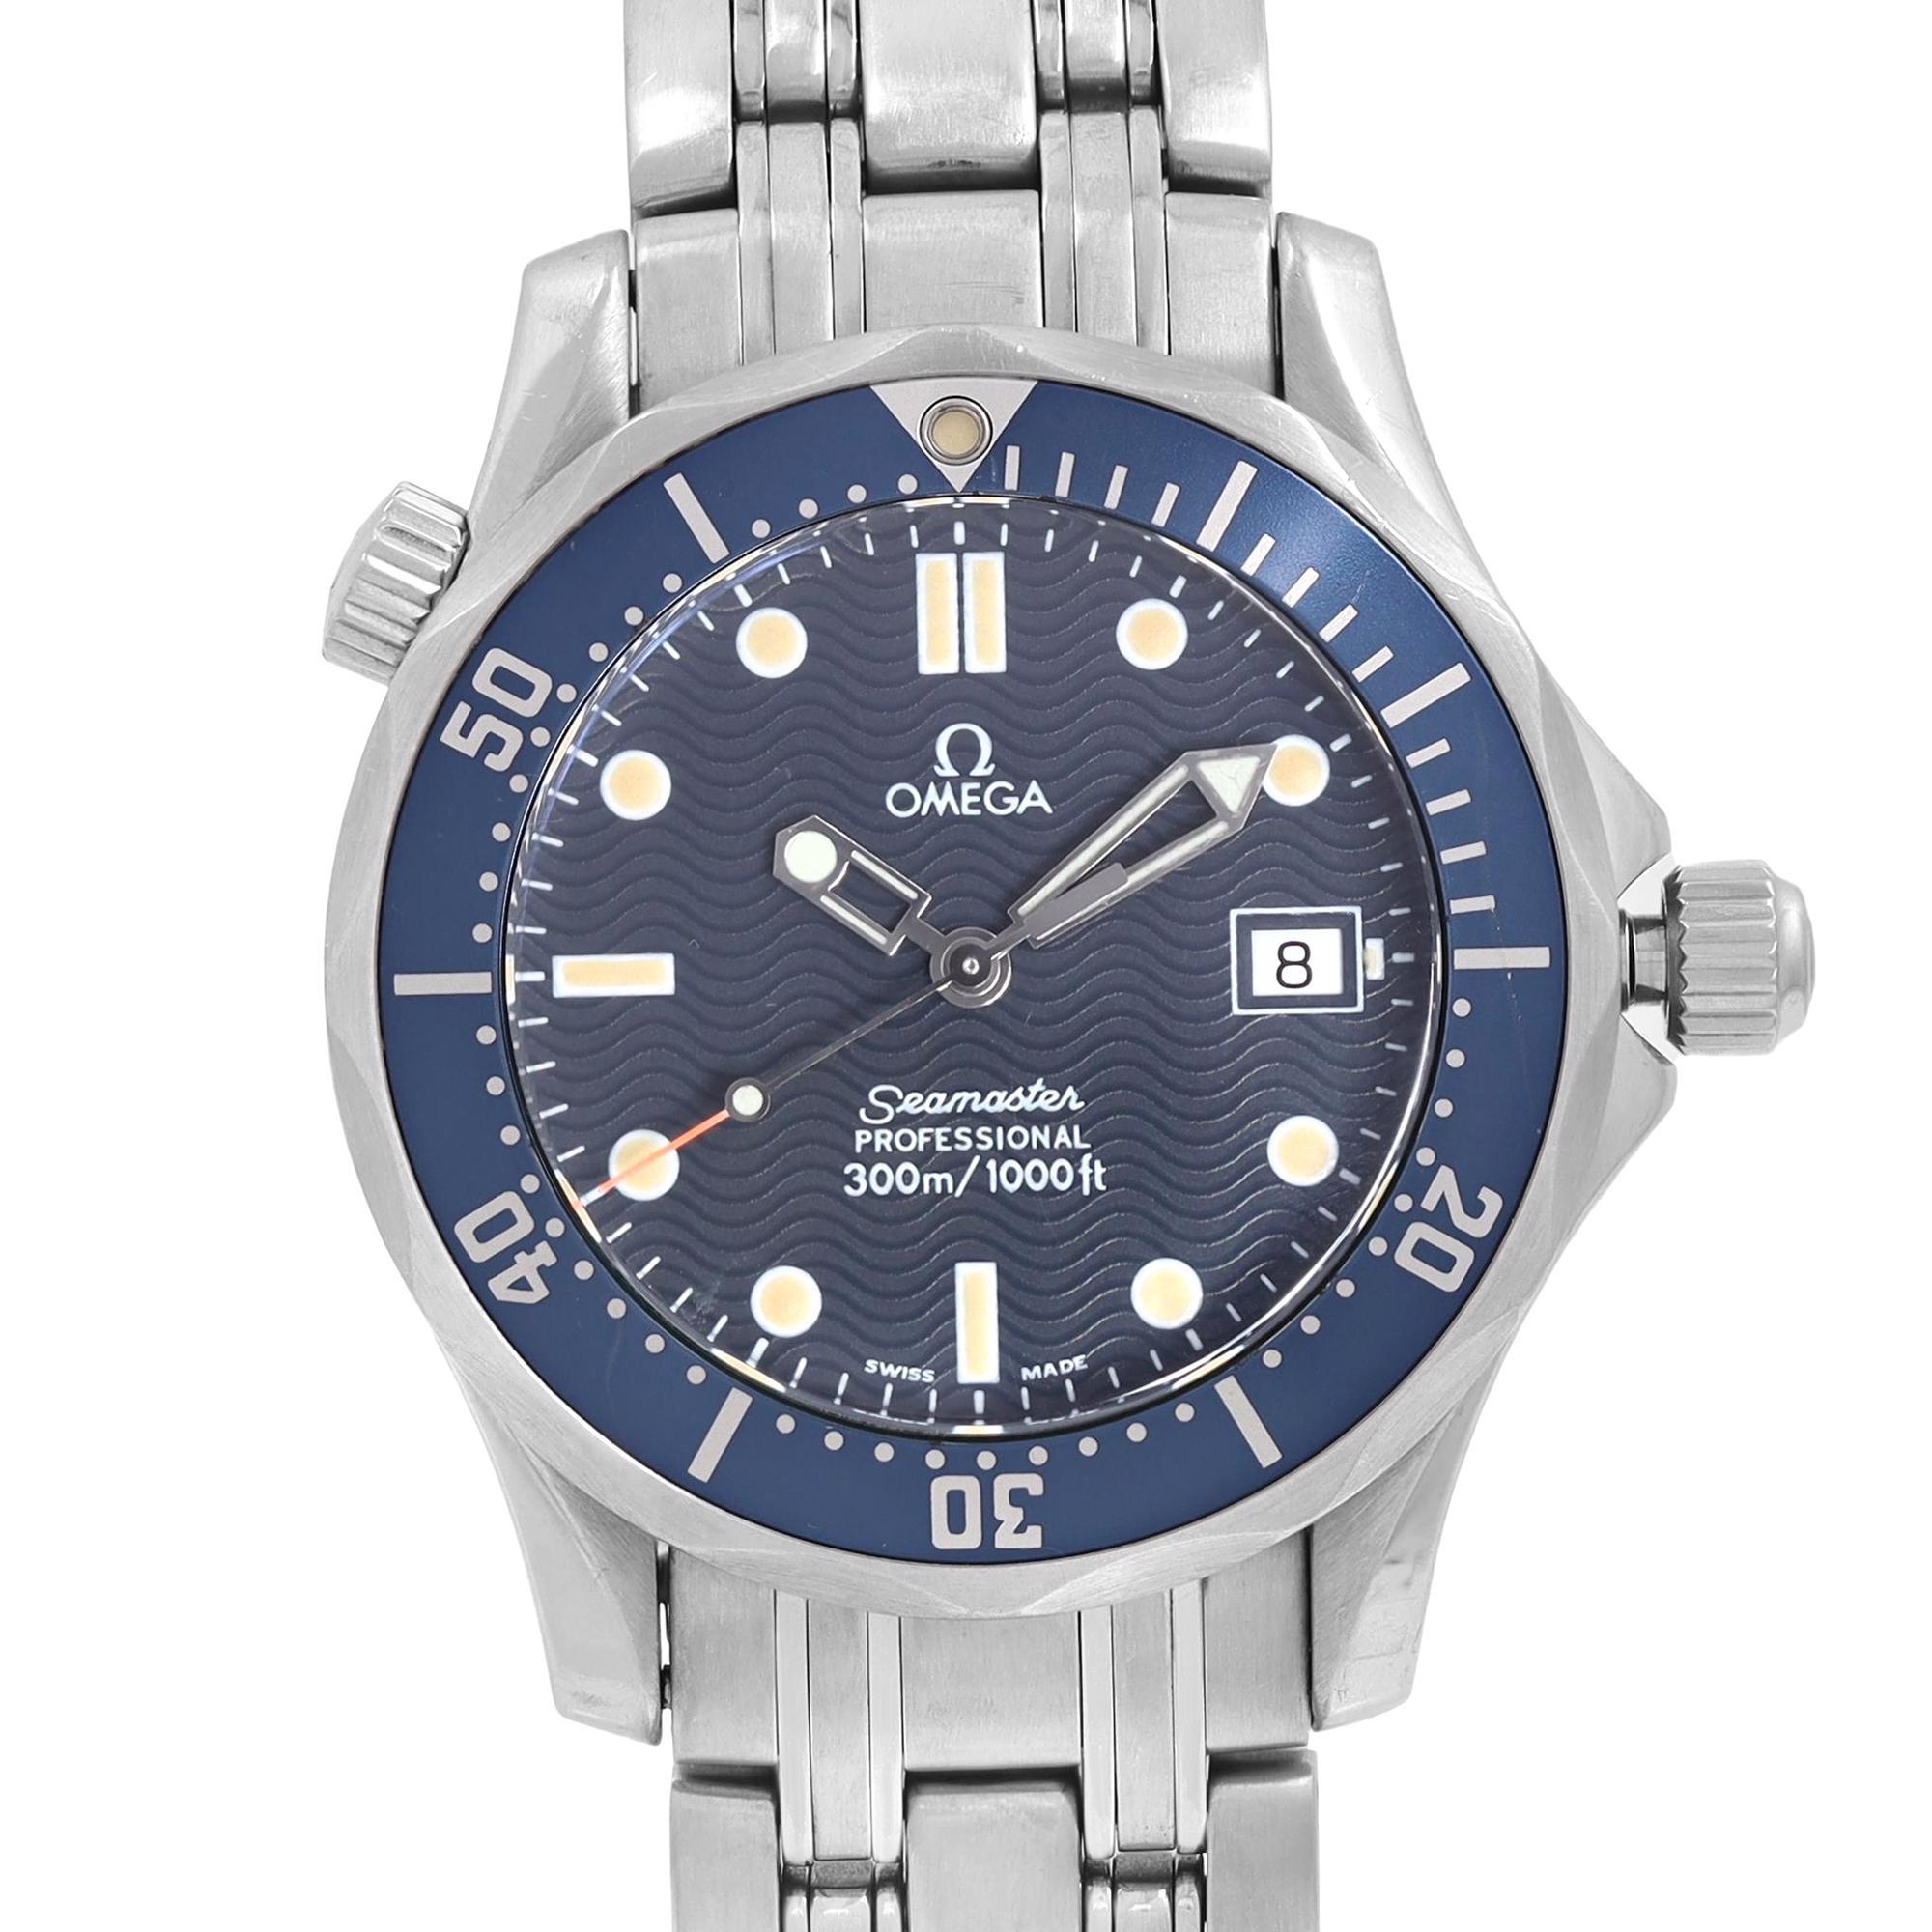 Pre-owned Omega Seamaster 36mm Stainless Steel Blue Dial Automatic Mens Watch 2561.80.00. Minor Scratches and Nicks on the Bezels Blue Aluminum Insert. This Beautiful Timepiece is Powered by Quartz (Battery) Movement and Features: Stainless Steel